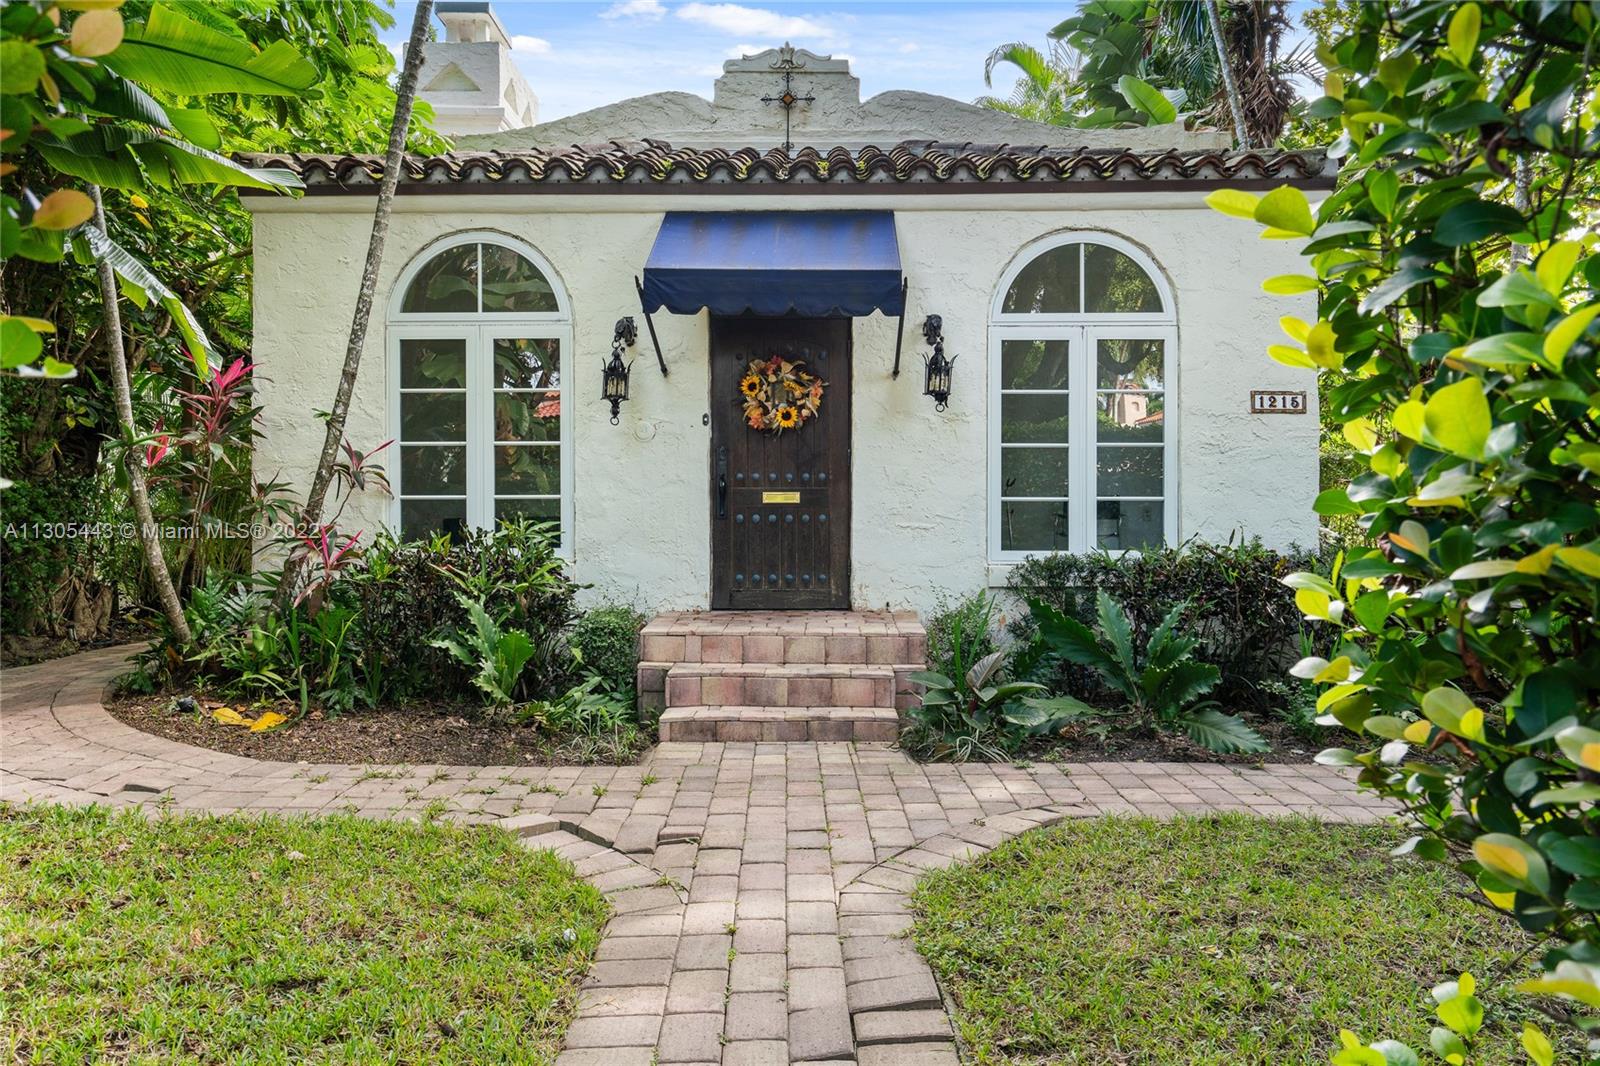 Beautiful Old Spanish home on a corner lot in Coral Gables. Impact Glass windows all over, 2 car garage.Spacious sun room upon entering that has high ceilings.Mosaic tile floors,charming fireplace in living room,large bright windows,hardwood floors,spacious main bedroom suite has a large walk in closet and main full bathroom,large living room and spacious informal dining room.Nice and bright kitchen,granite countertops,marble backsplash,wood chop block, and skylight.
Detached 3rd bedroom on second floor, carriage house style.It has lots of light,full bathroom,kitchenette and walk in closet. Enjoy beautiful mature trees and plants giving lots of privacy and  quite street. Brick paver walking path surrounds the outside. Newer AC. 2/2 main house plus detached 1/1 on the second floor.